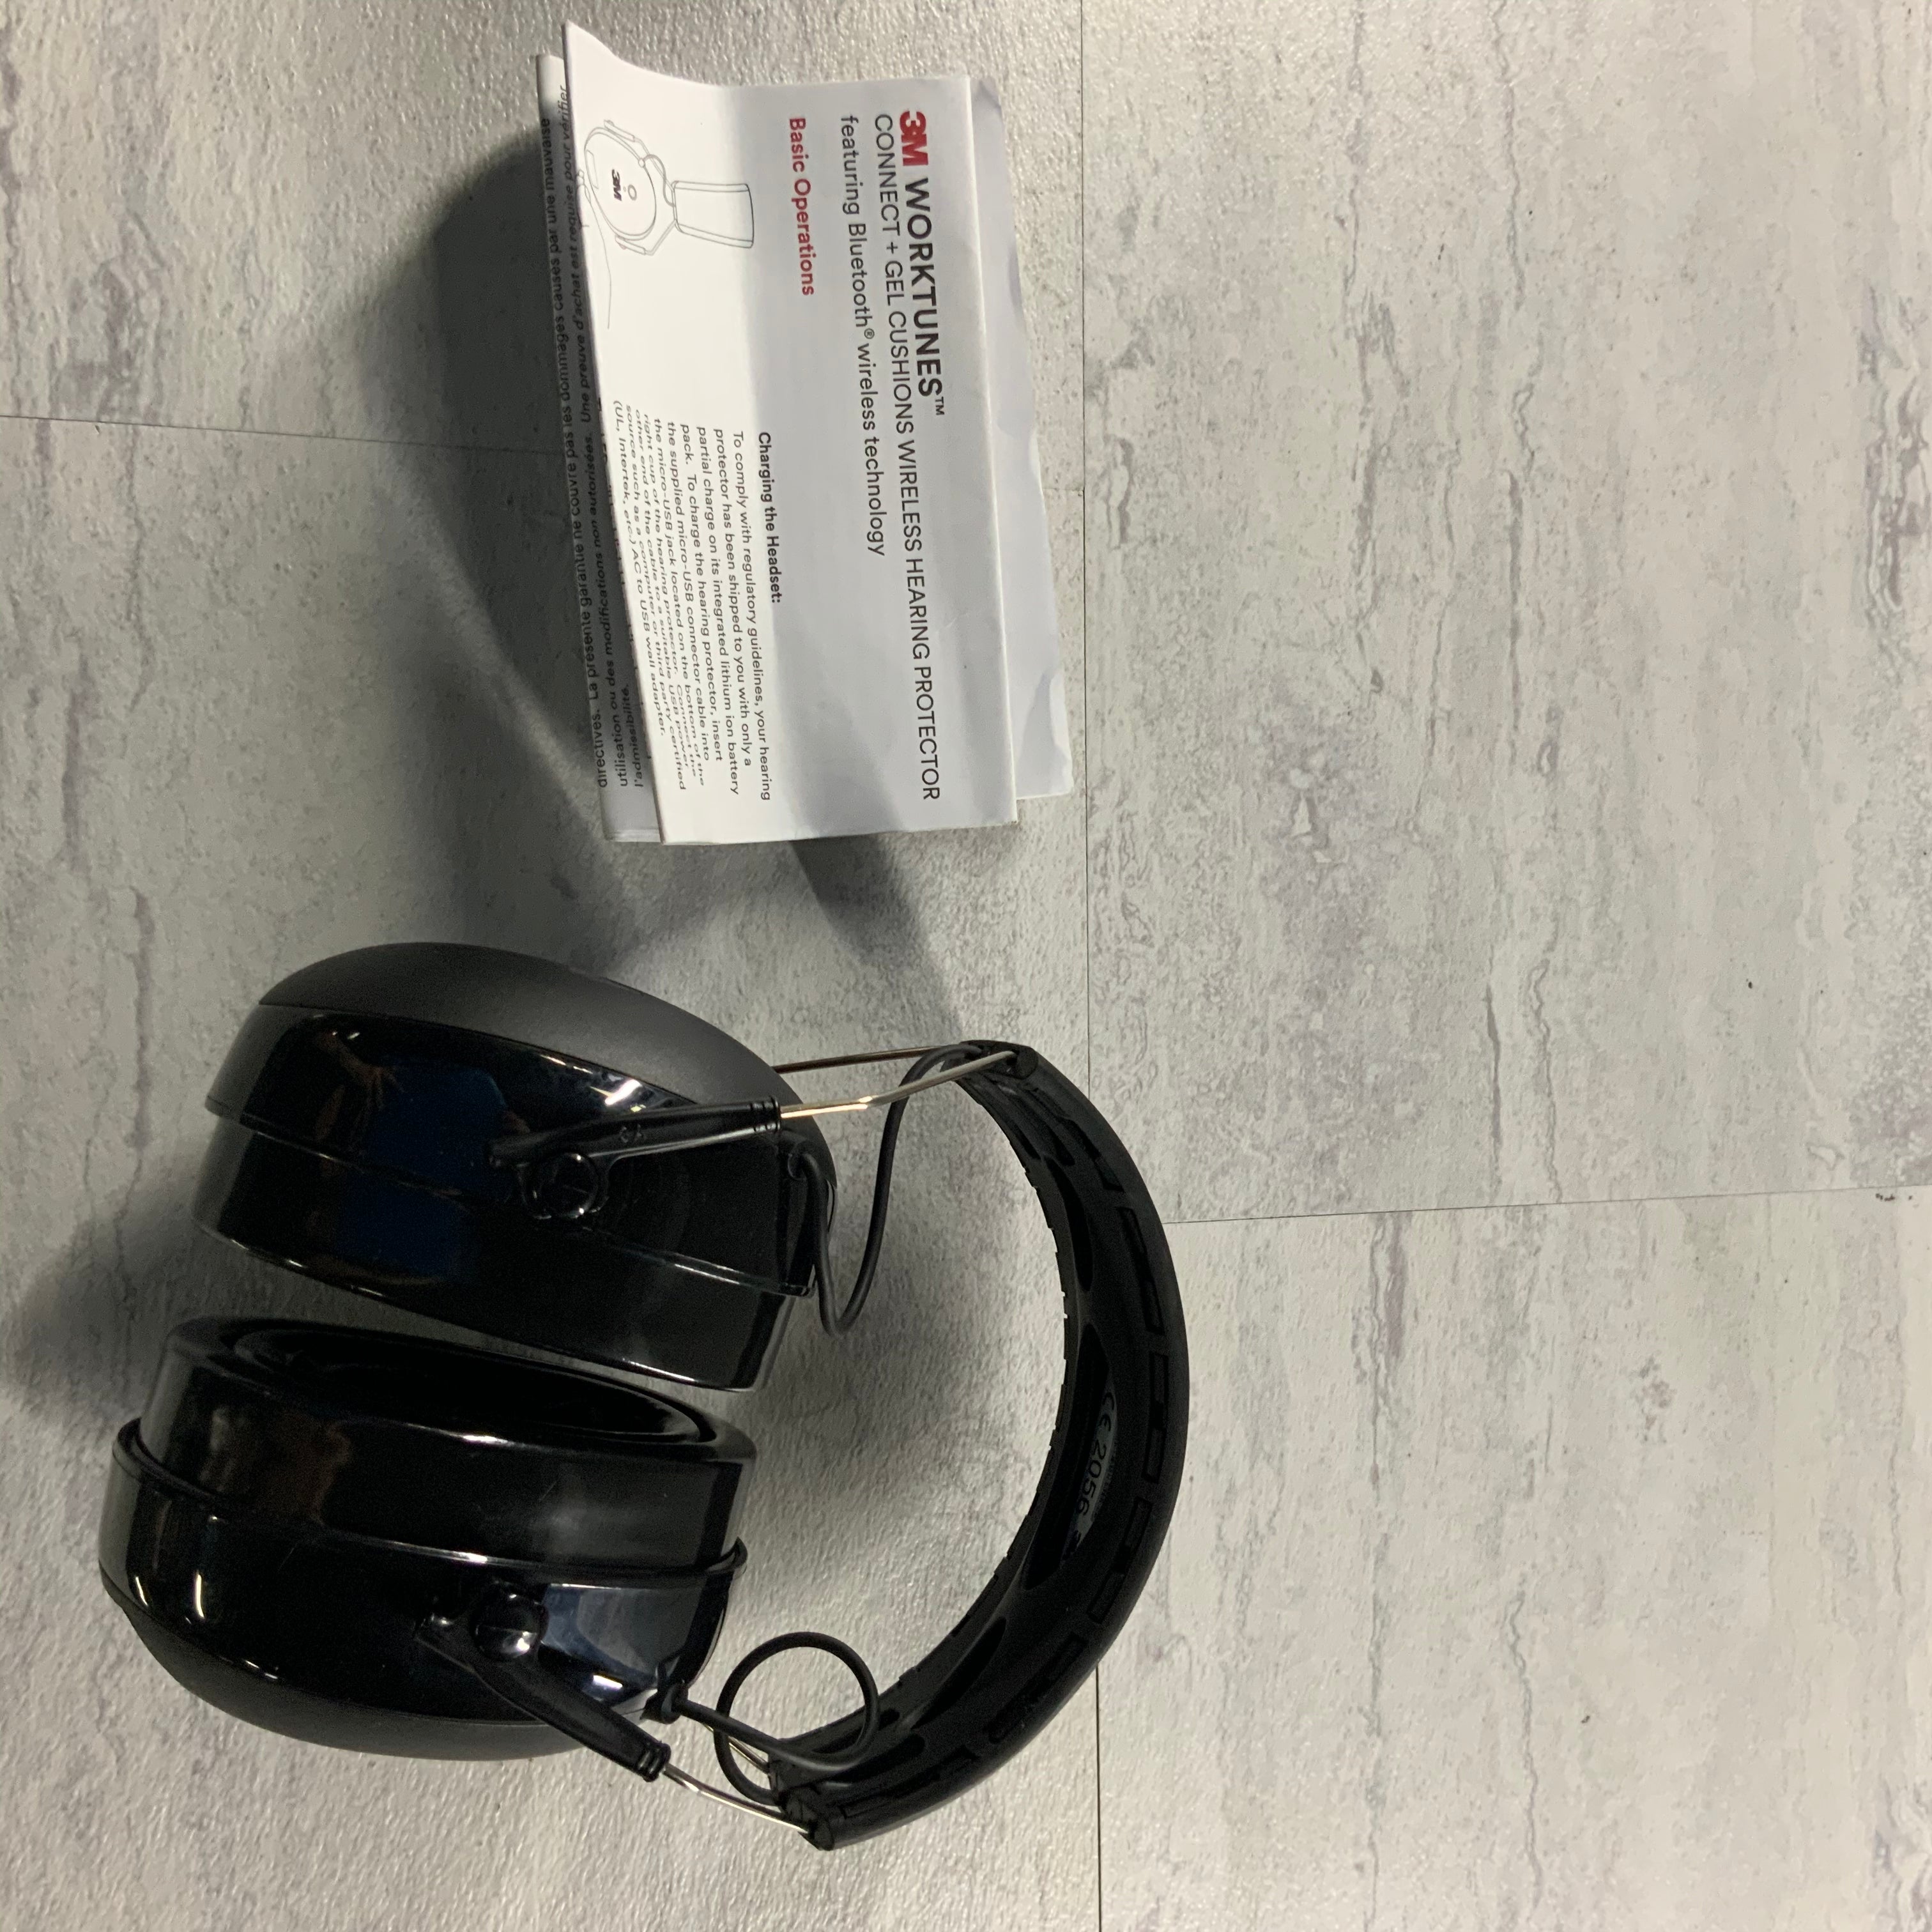 3M WorkTunes Connect, Gel Ear Cushions Hearing Protector - Bluetooth Technology (6959887319223)